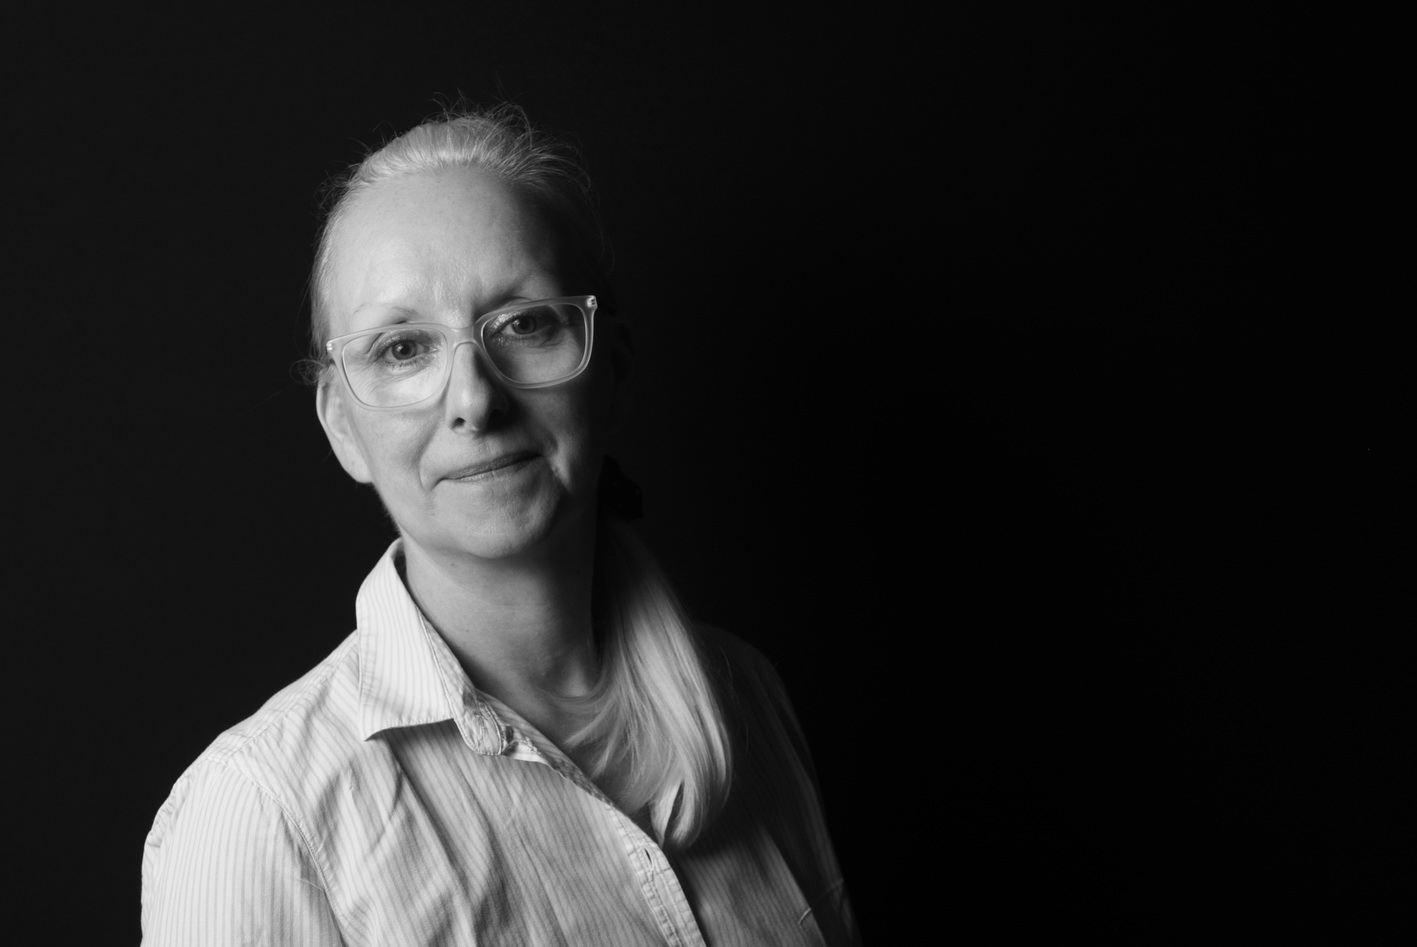 Photograph of Liverpool therapist Fiona Wilkie